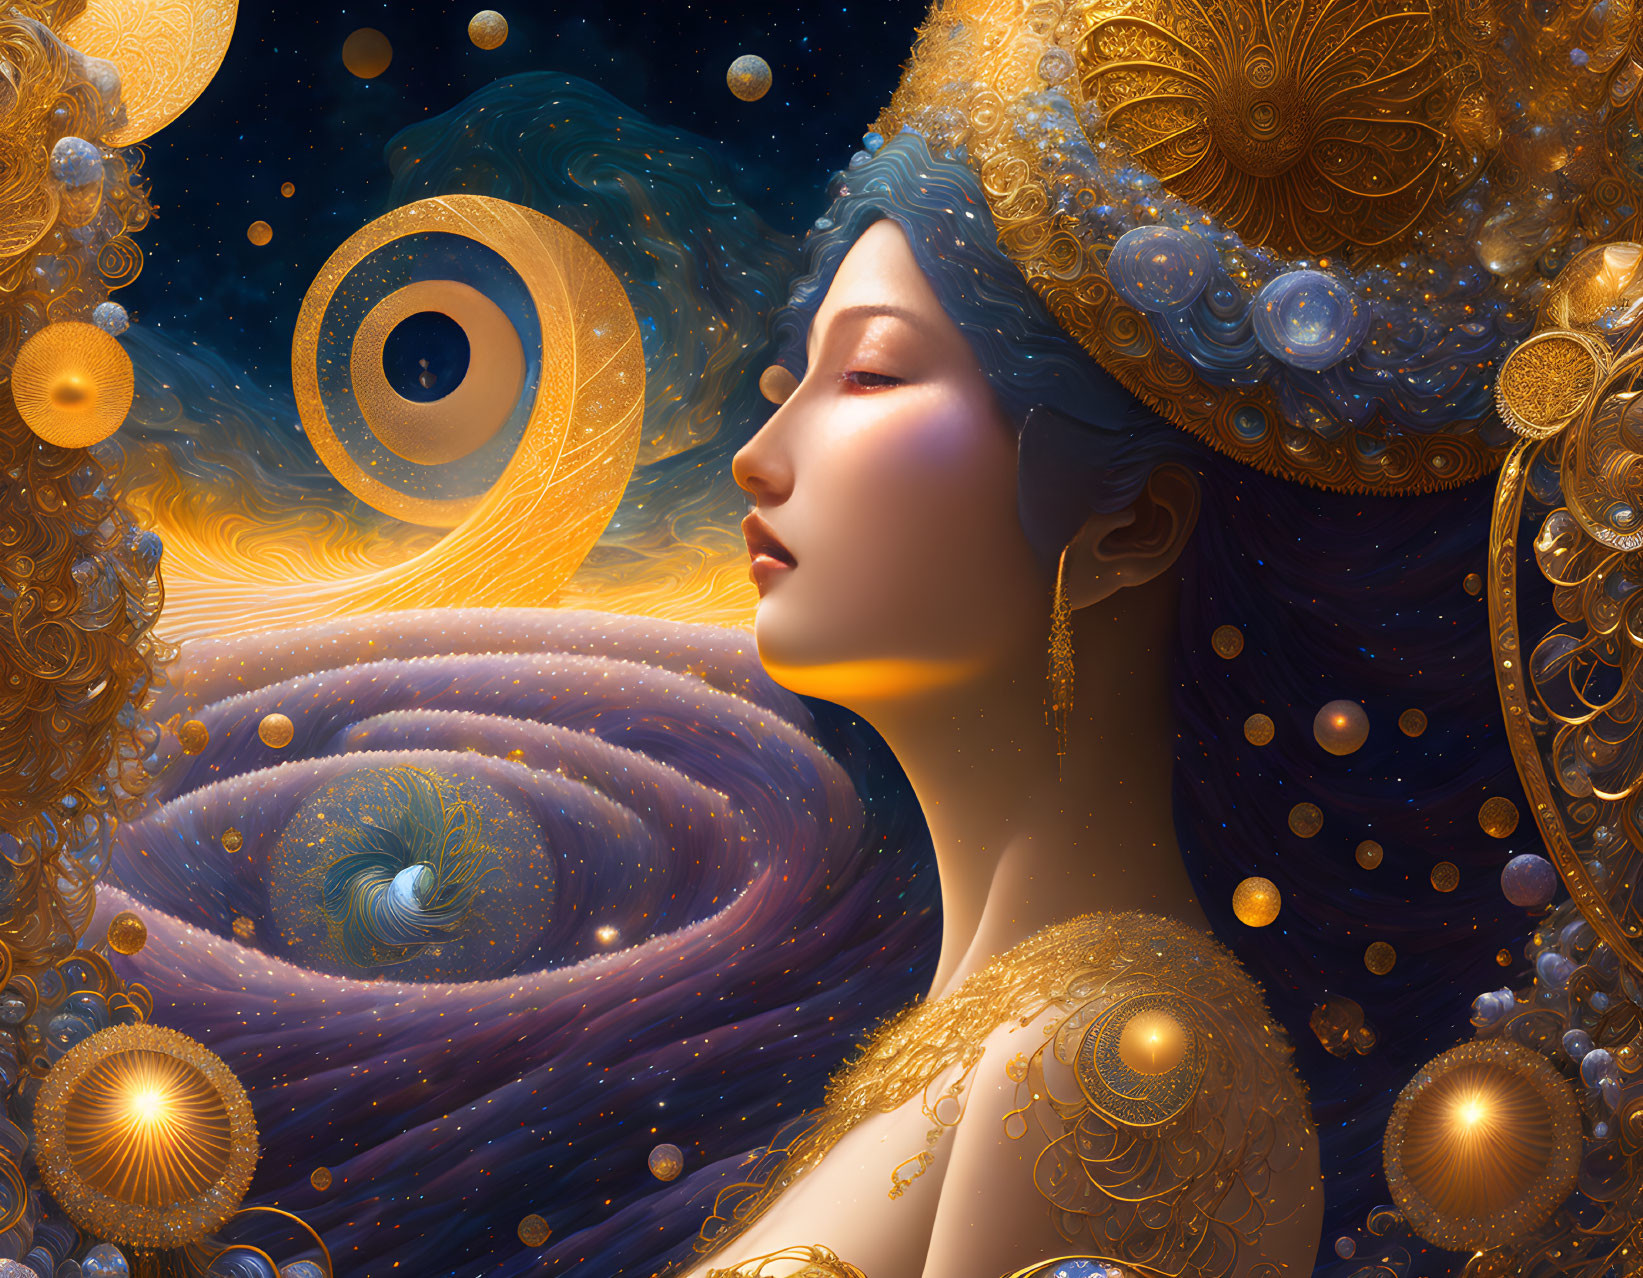 Blue-skinned woman merges with cosmic scenery of galaxies and gold accents.